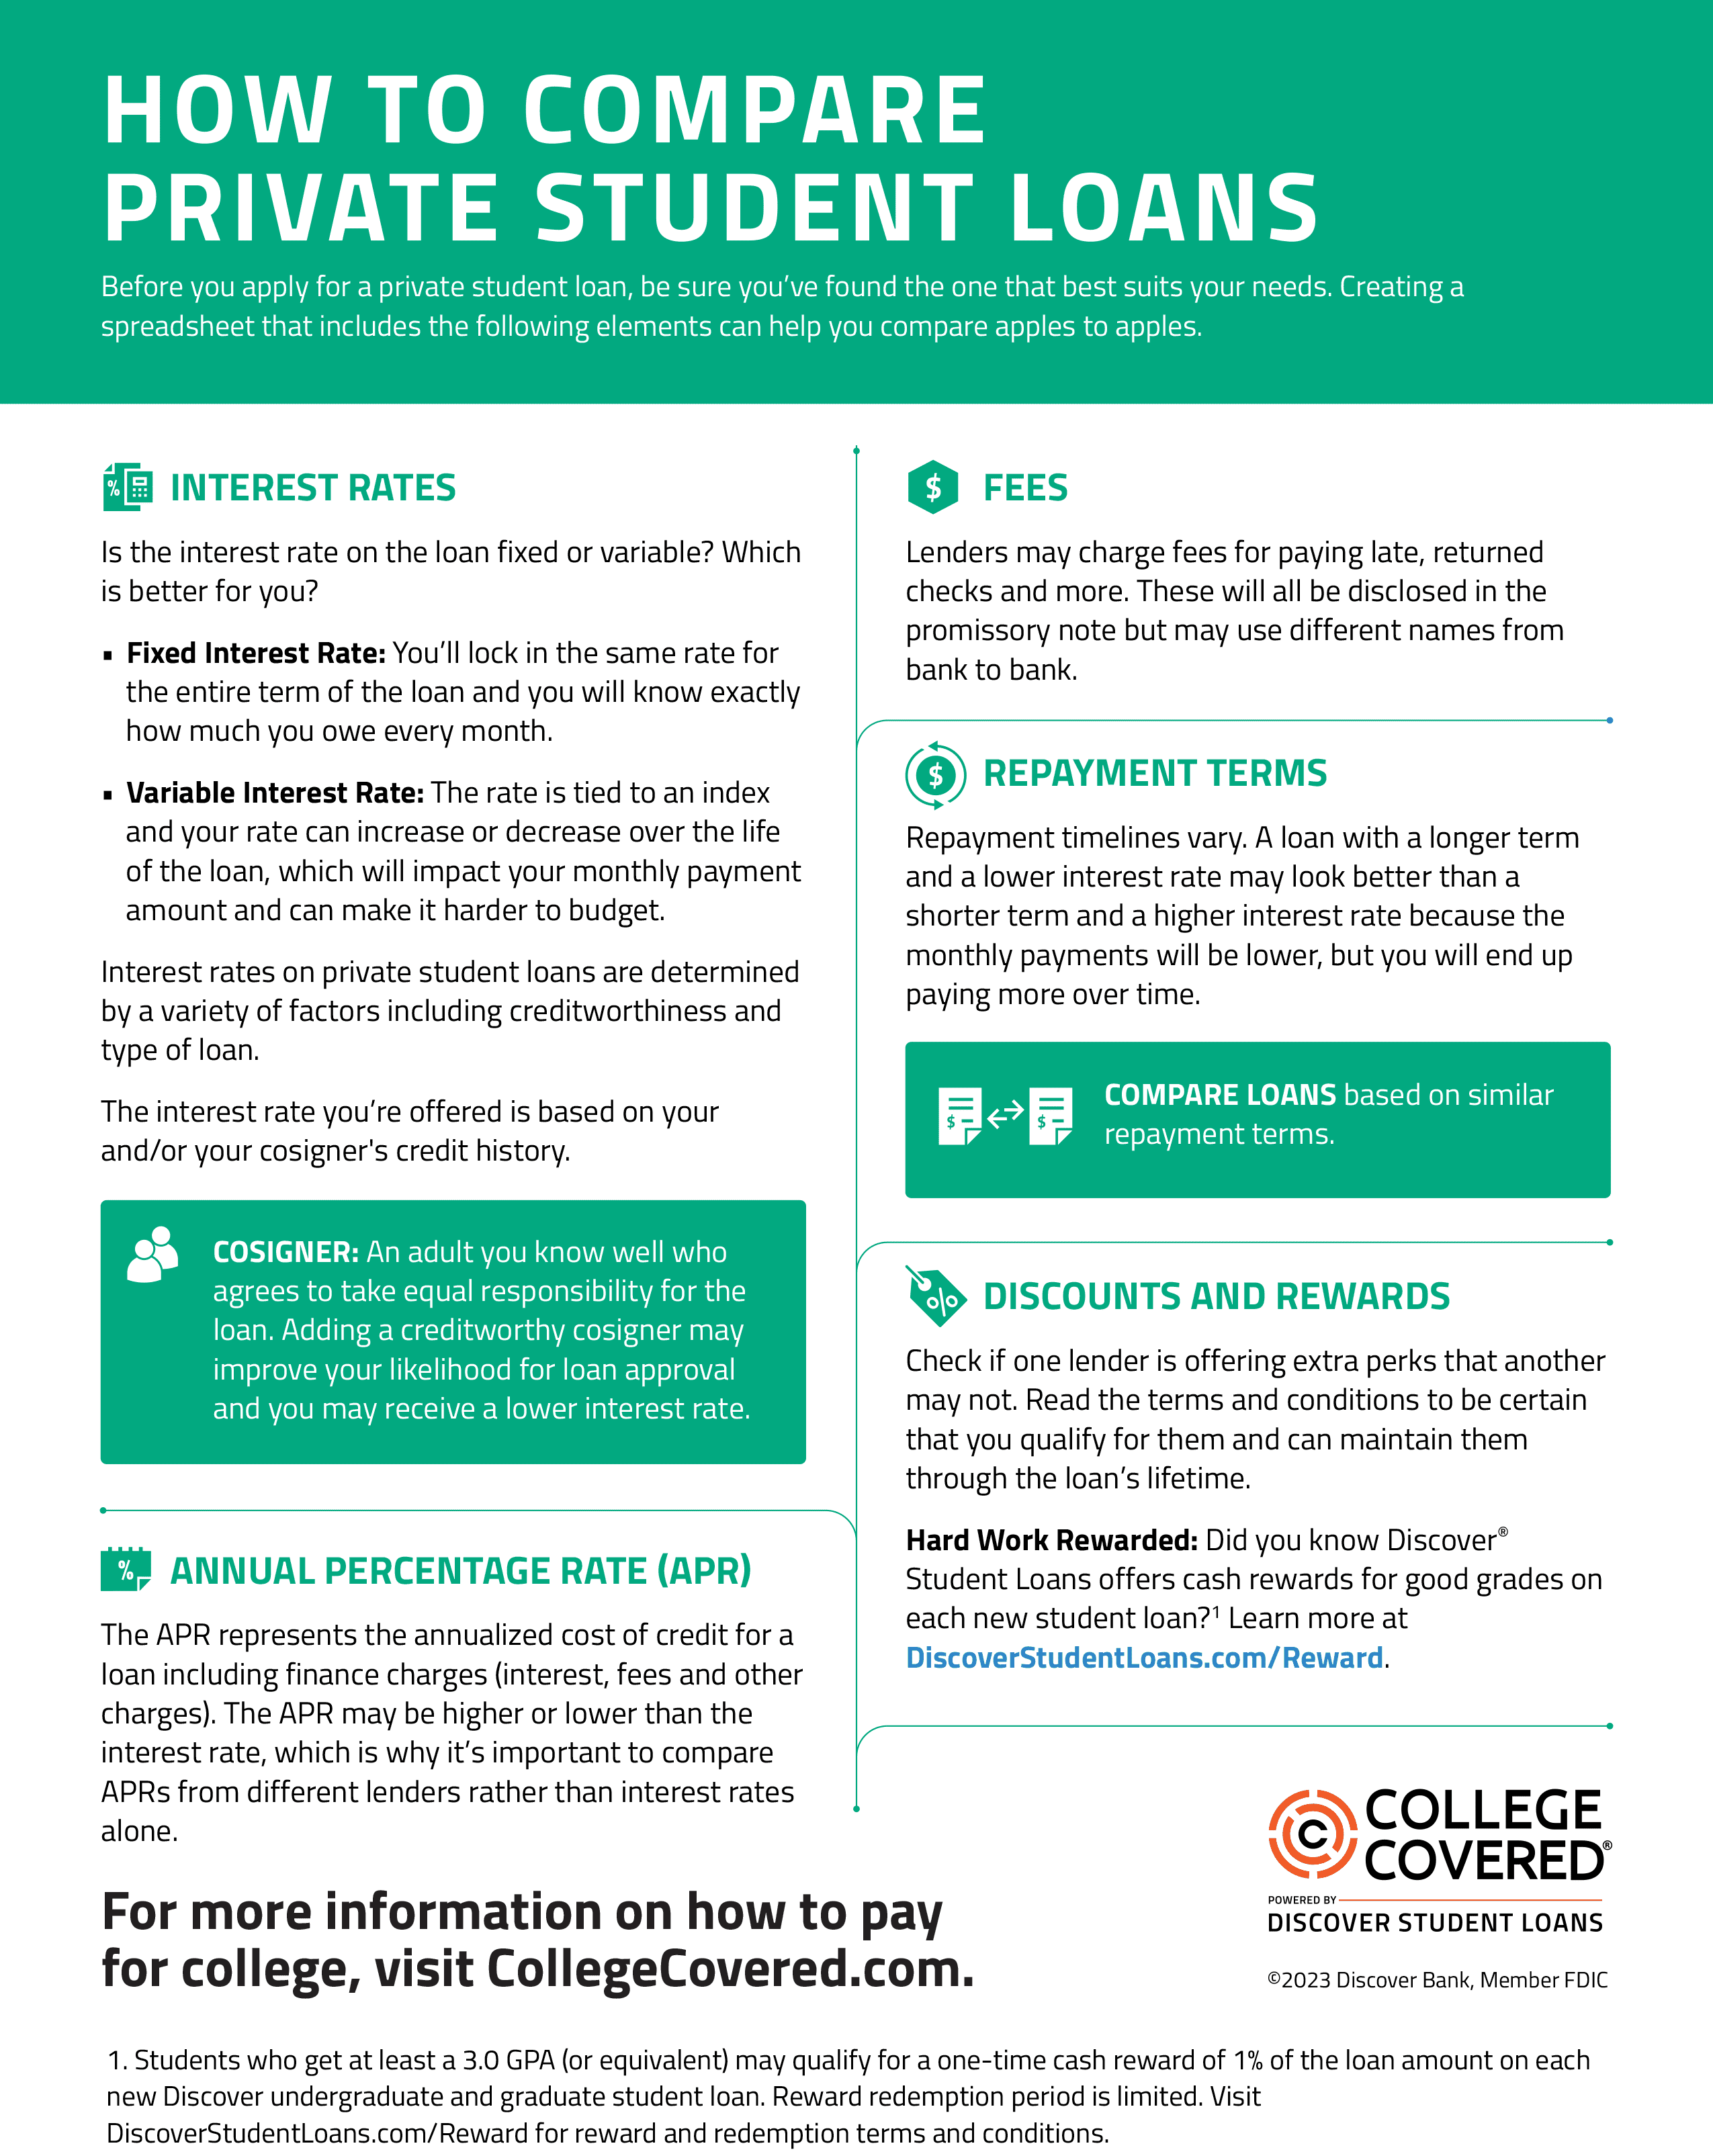 How to Compare Private Student Loans